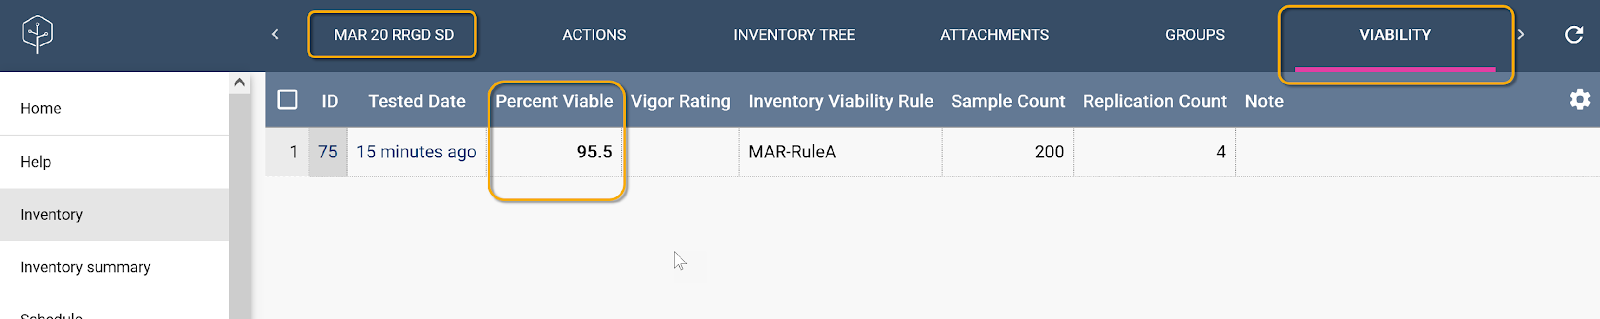 Test results for inventory item